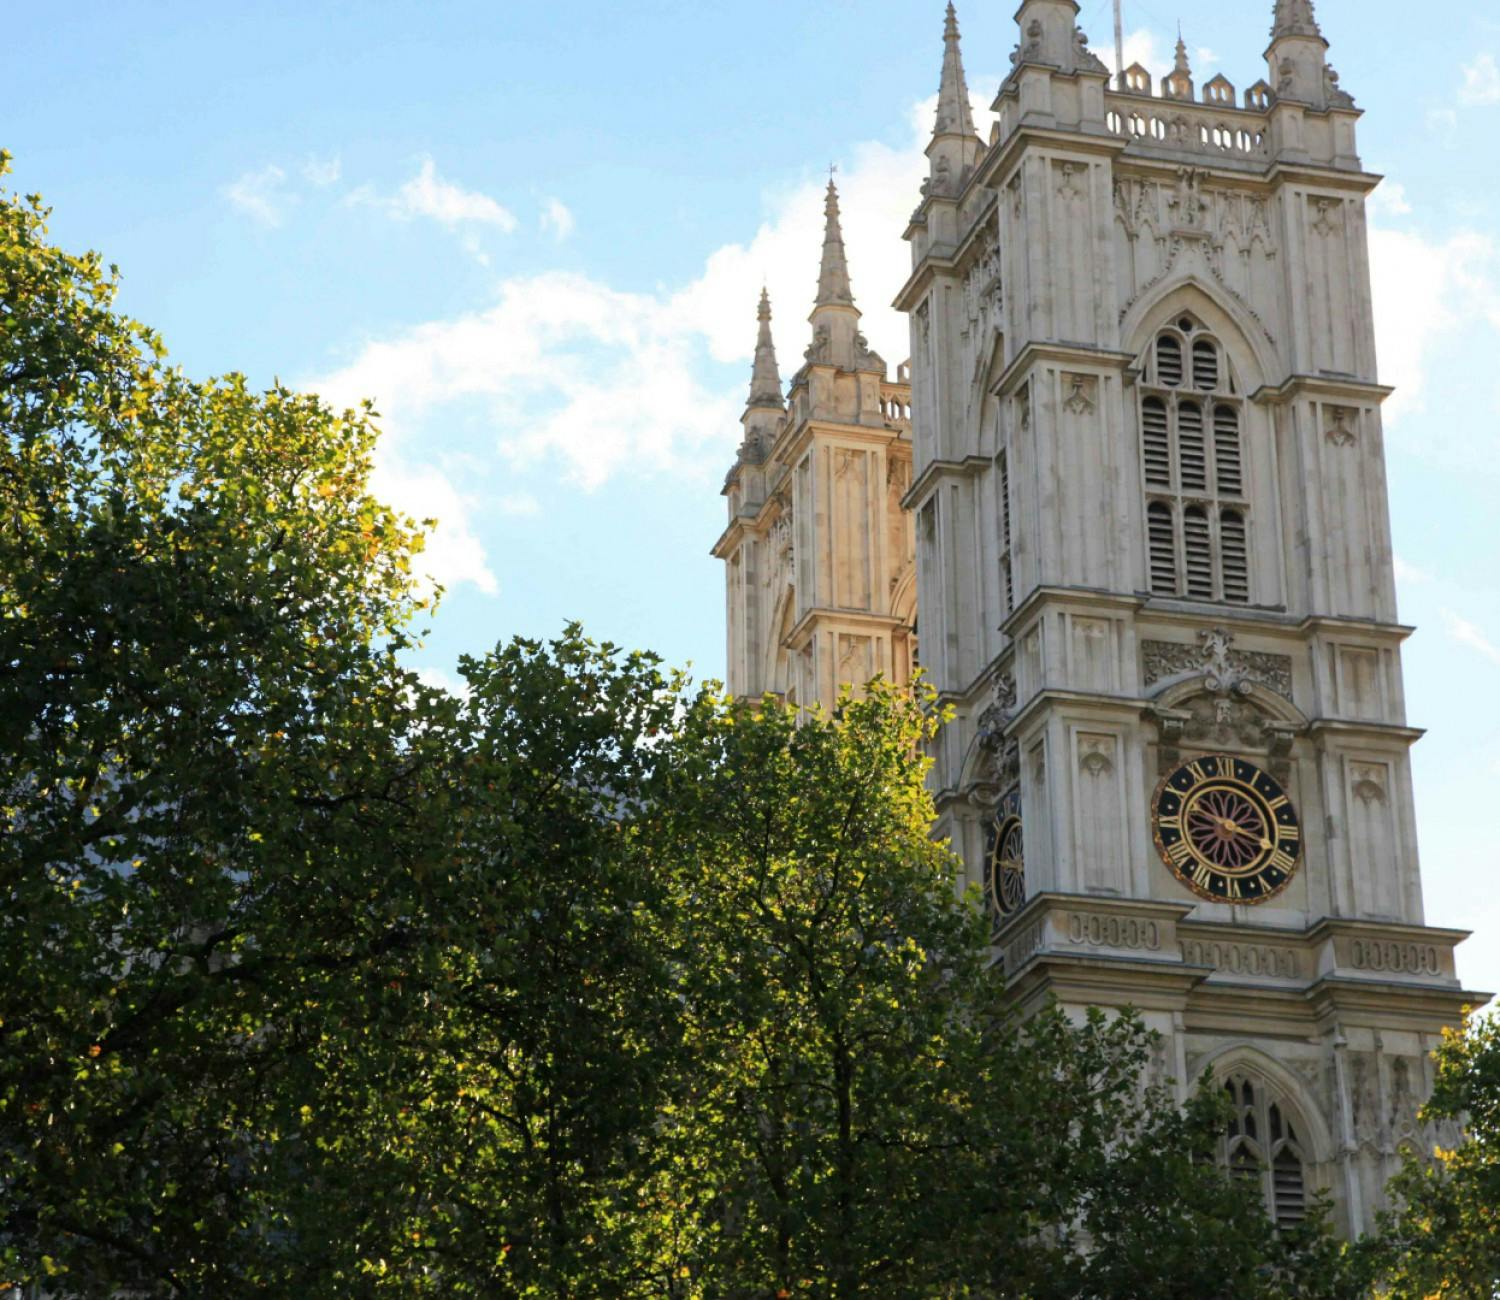 Westminster Abbey and the Changing of the Guard